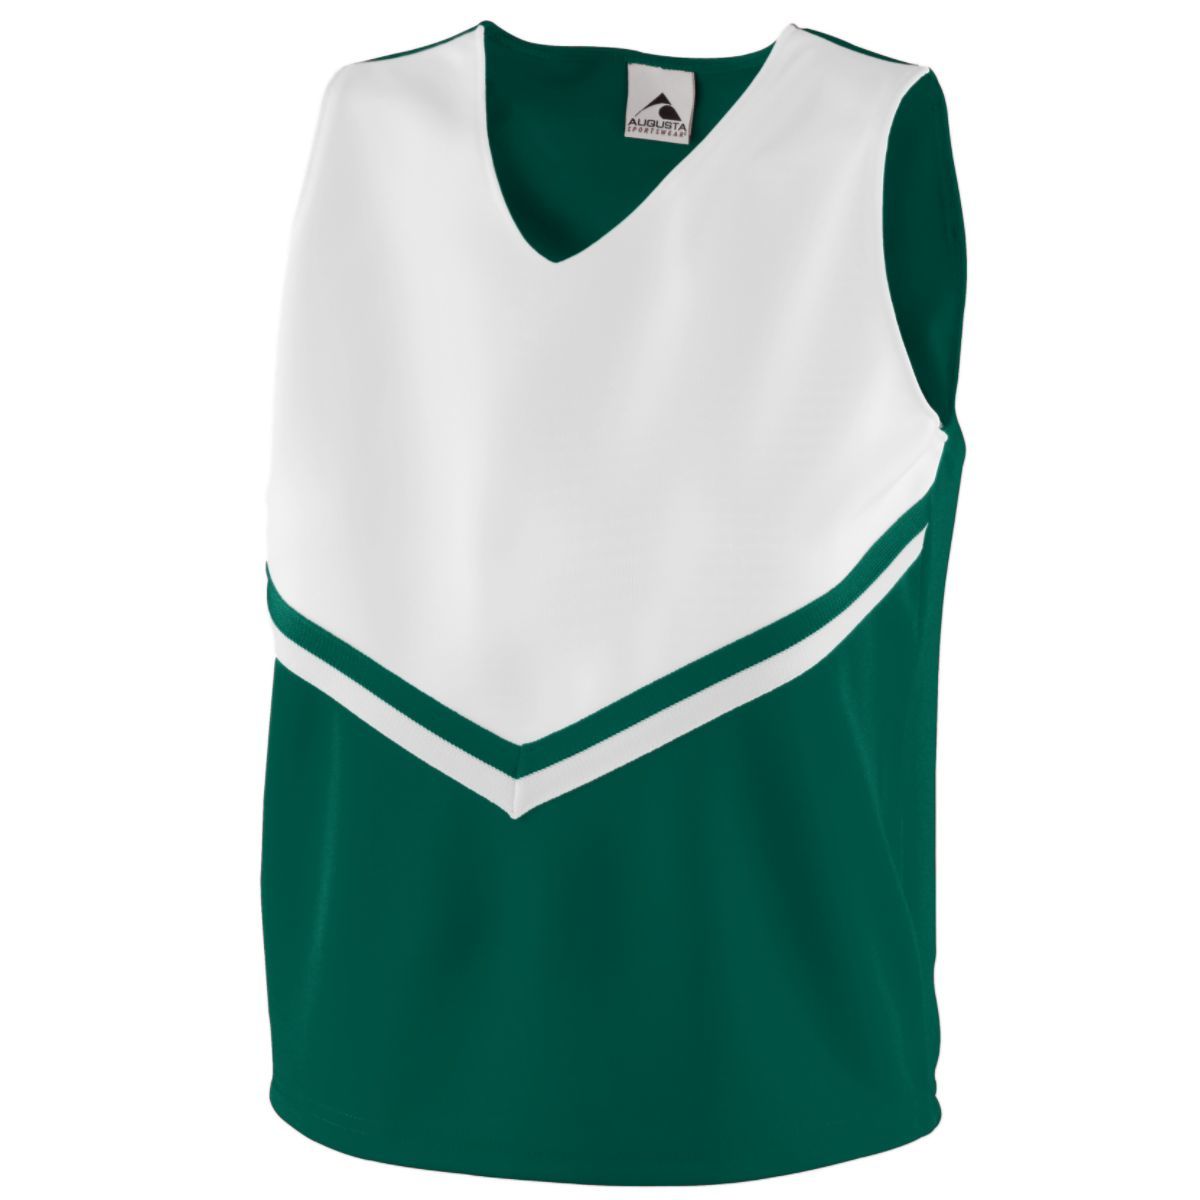 Augusta Sportswear Girls Pride Shell in Dark Green/White/White  -Part of the Girls, Augusta-Products, Cheer, Shirts product lines at KanaleyCreations.com